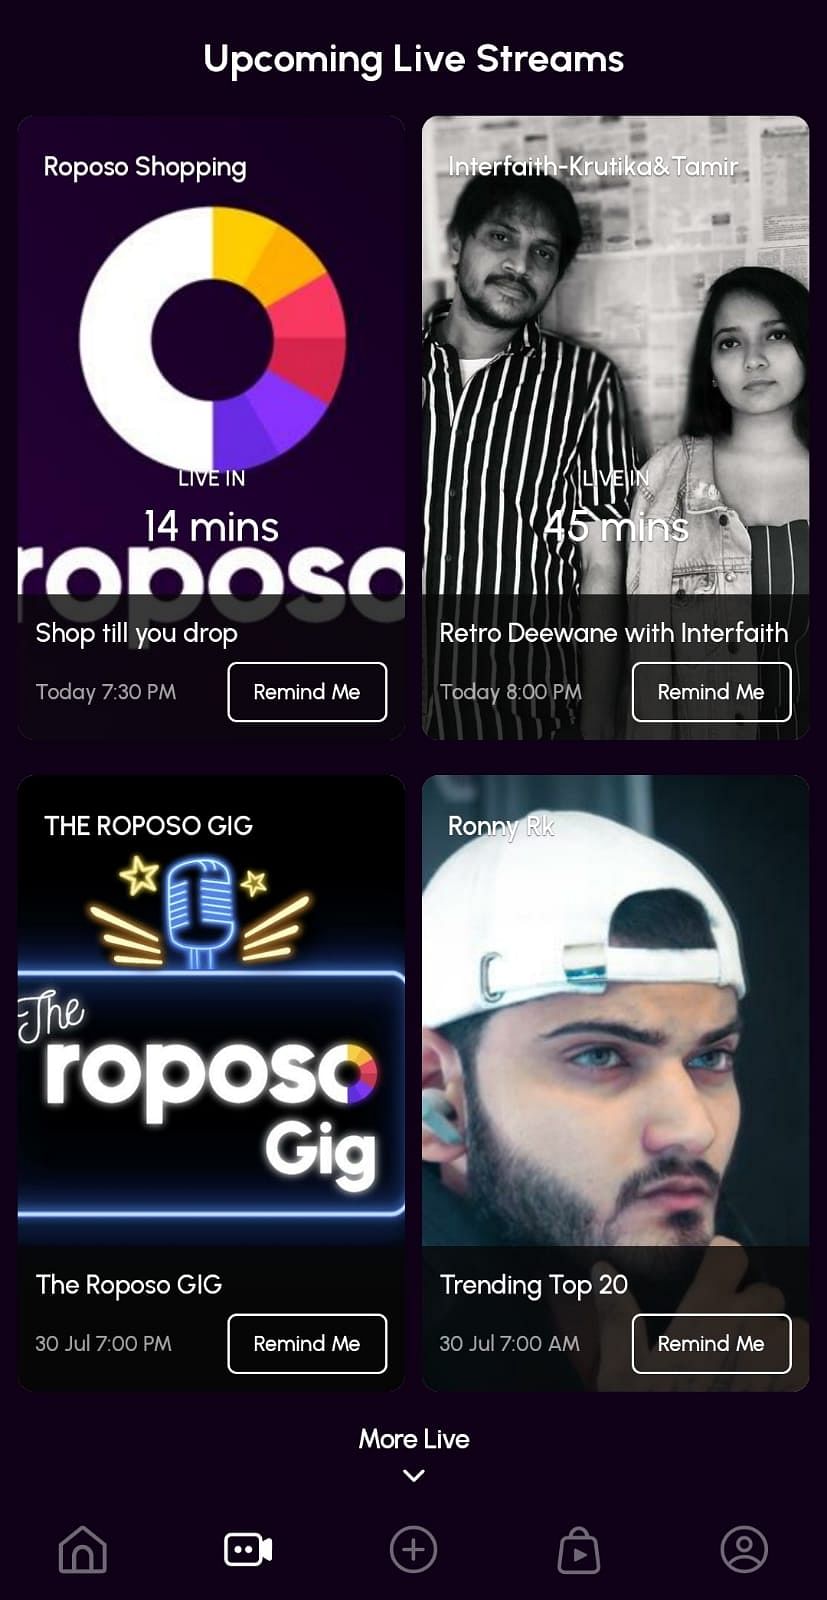 A glimpse of live videos on the Roposo app